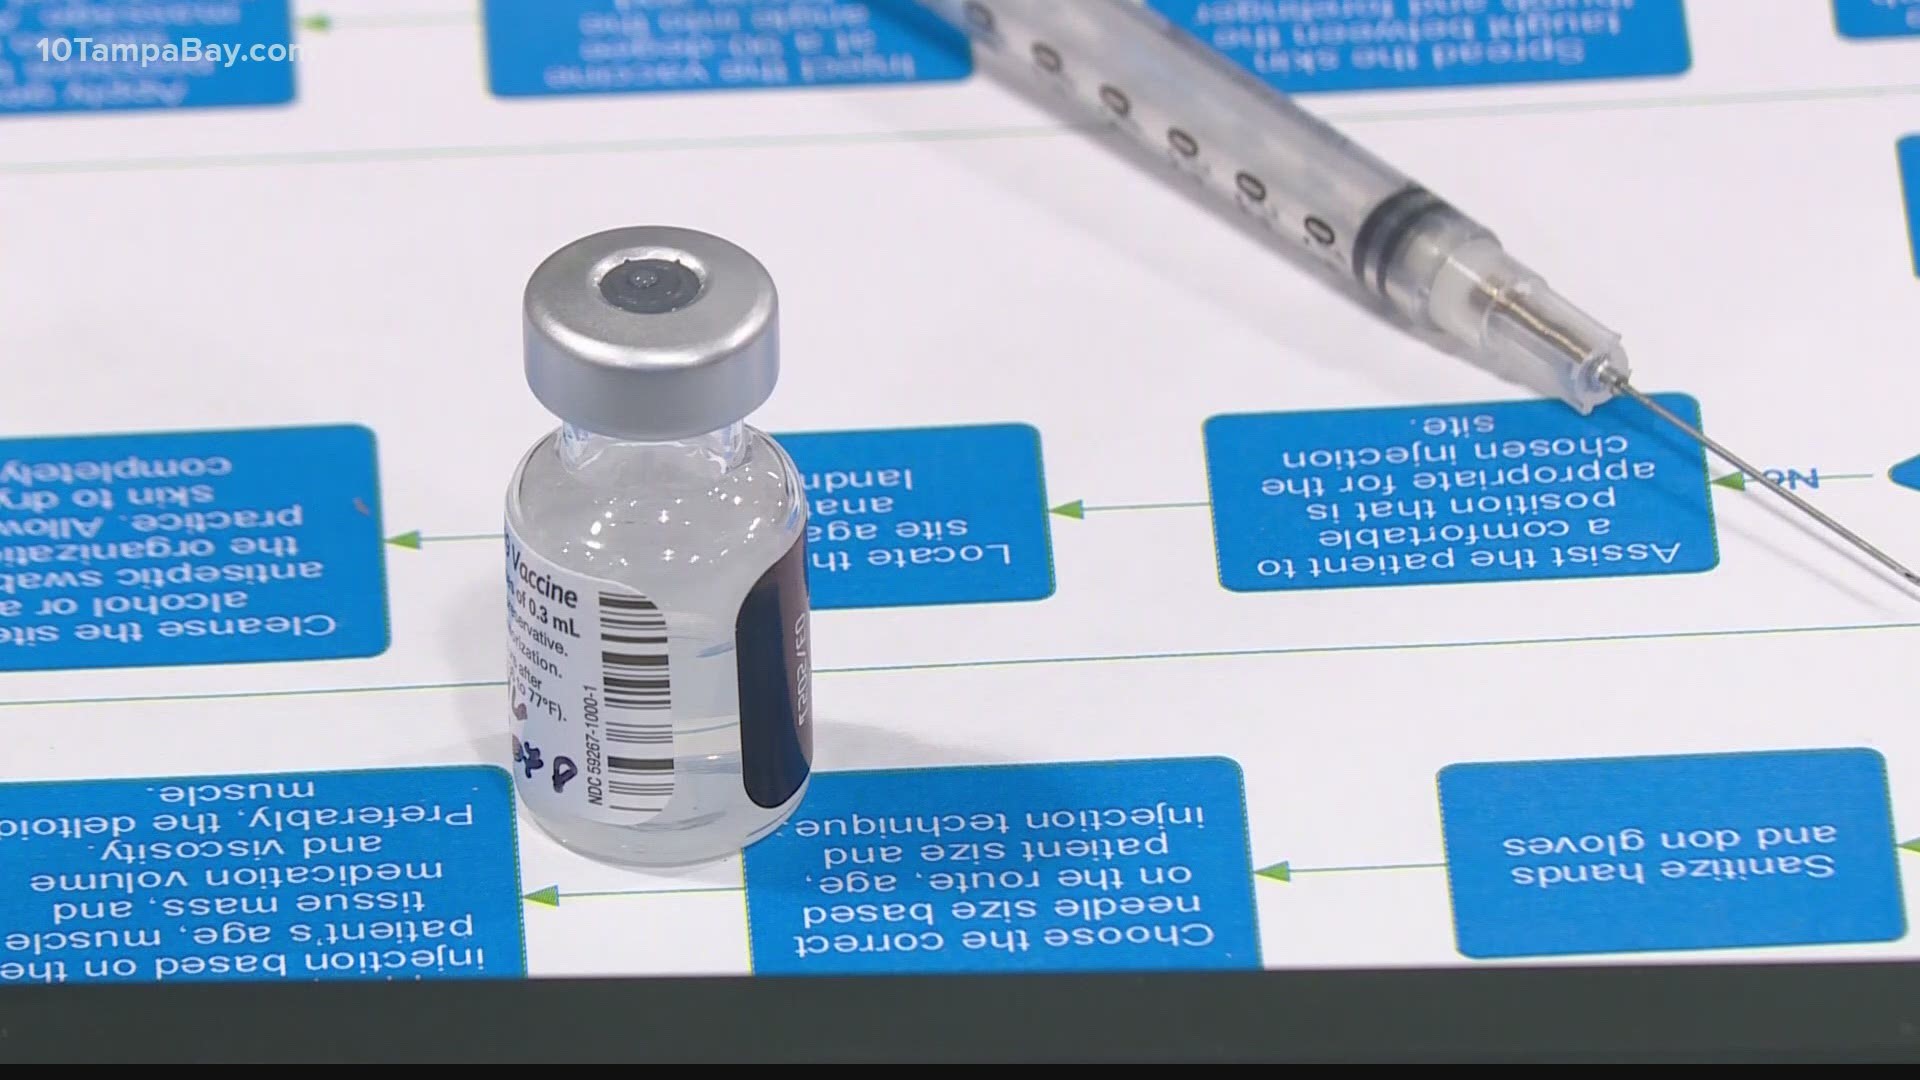 Pinellas and Hillsborough school districts rolled out plans with county health departments to ensure their oldest staff members can get vaccinated.